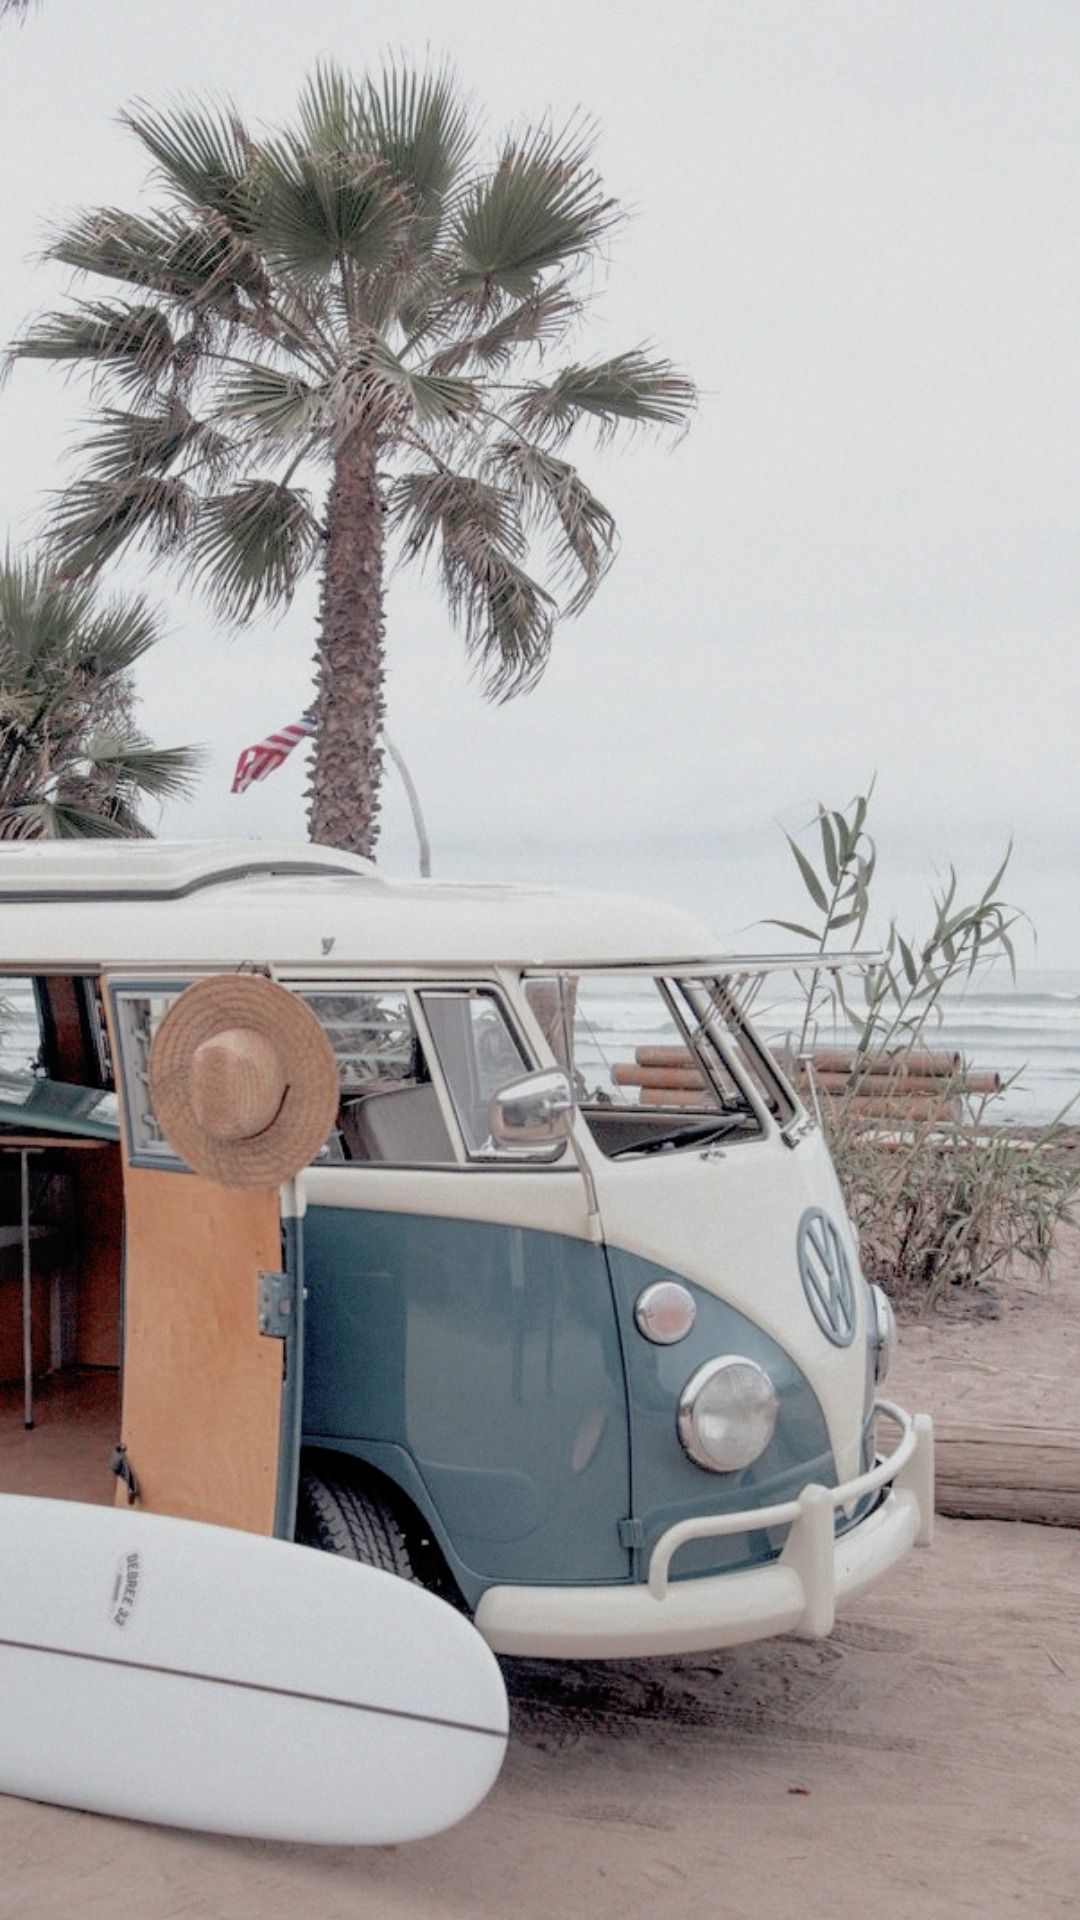 A blue and white VW bus with a surfboard in the back parked next to a palm tree - Beach